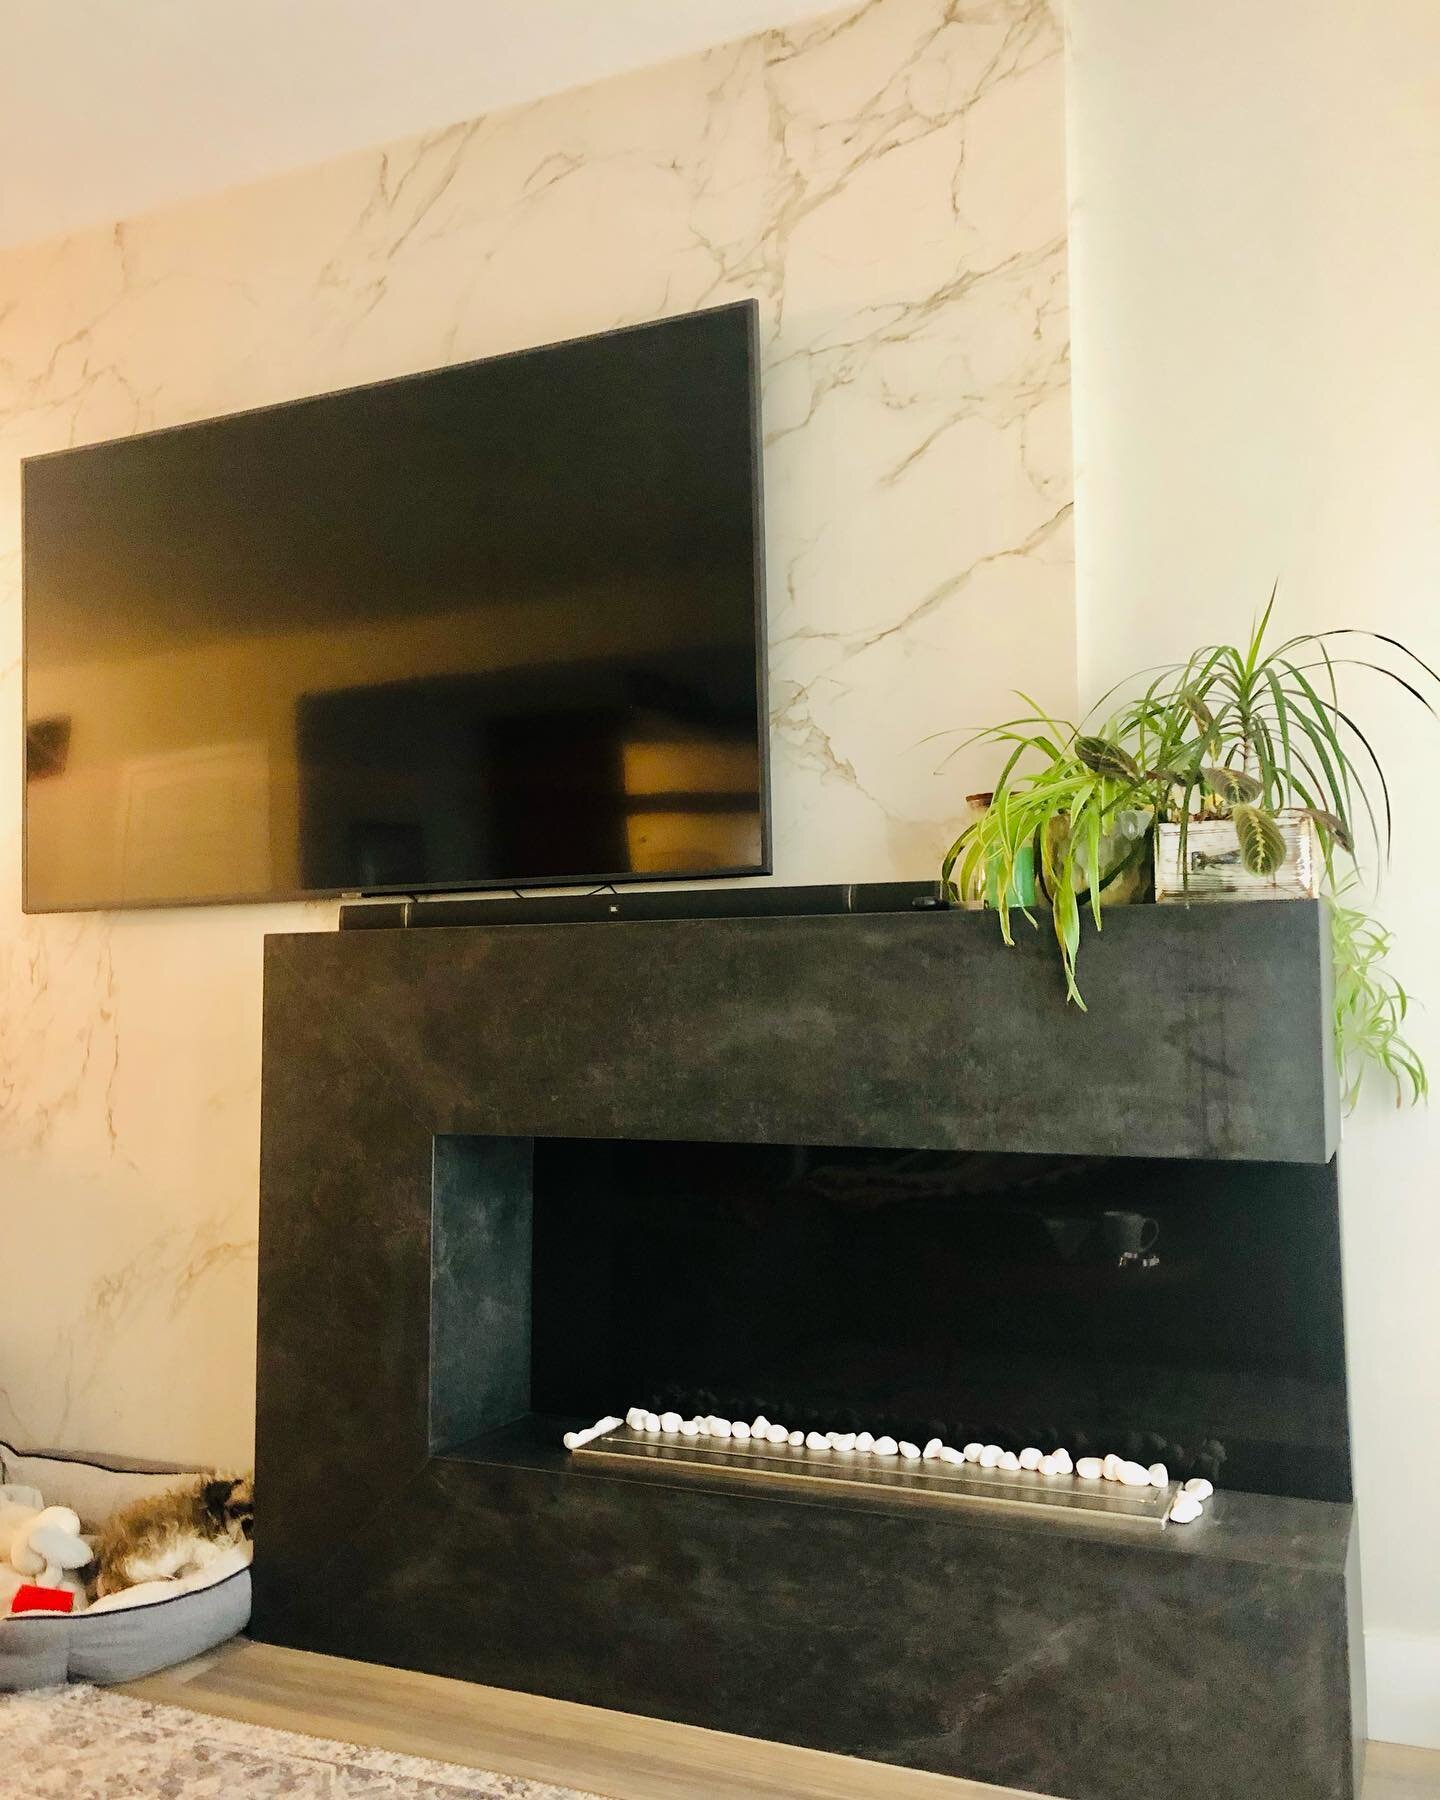 The feature of the living space - our custom designed open flame C shaped Dekton Fireplace - comes with a fluffy ball of fur to the left 🐶 
.
.
.
.
.
#revitastone #revitastonecountertopskelowna #kelownahomes #kelownabuild #kelownabuilders #kelownade